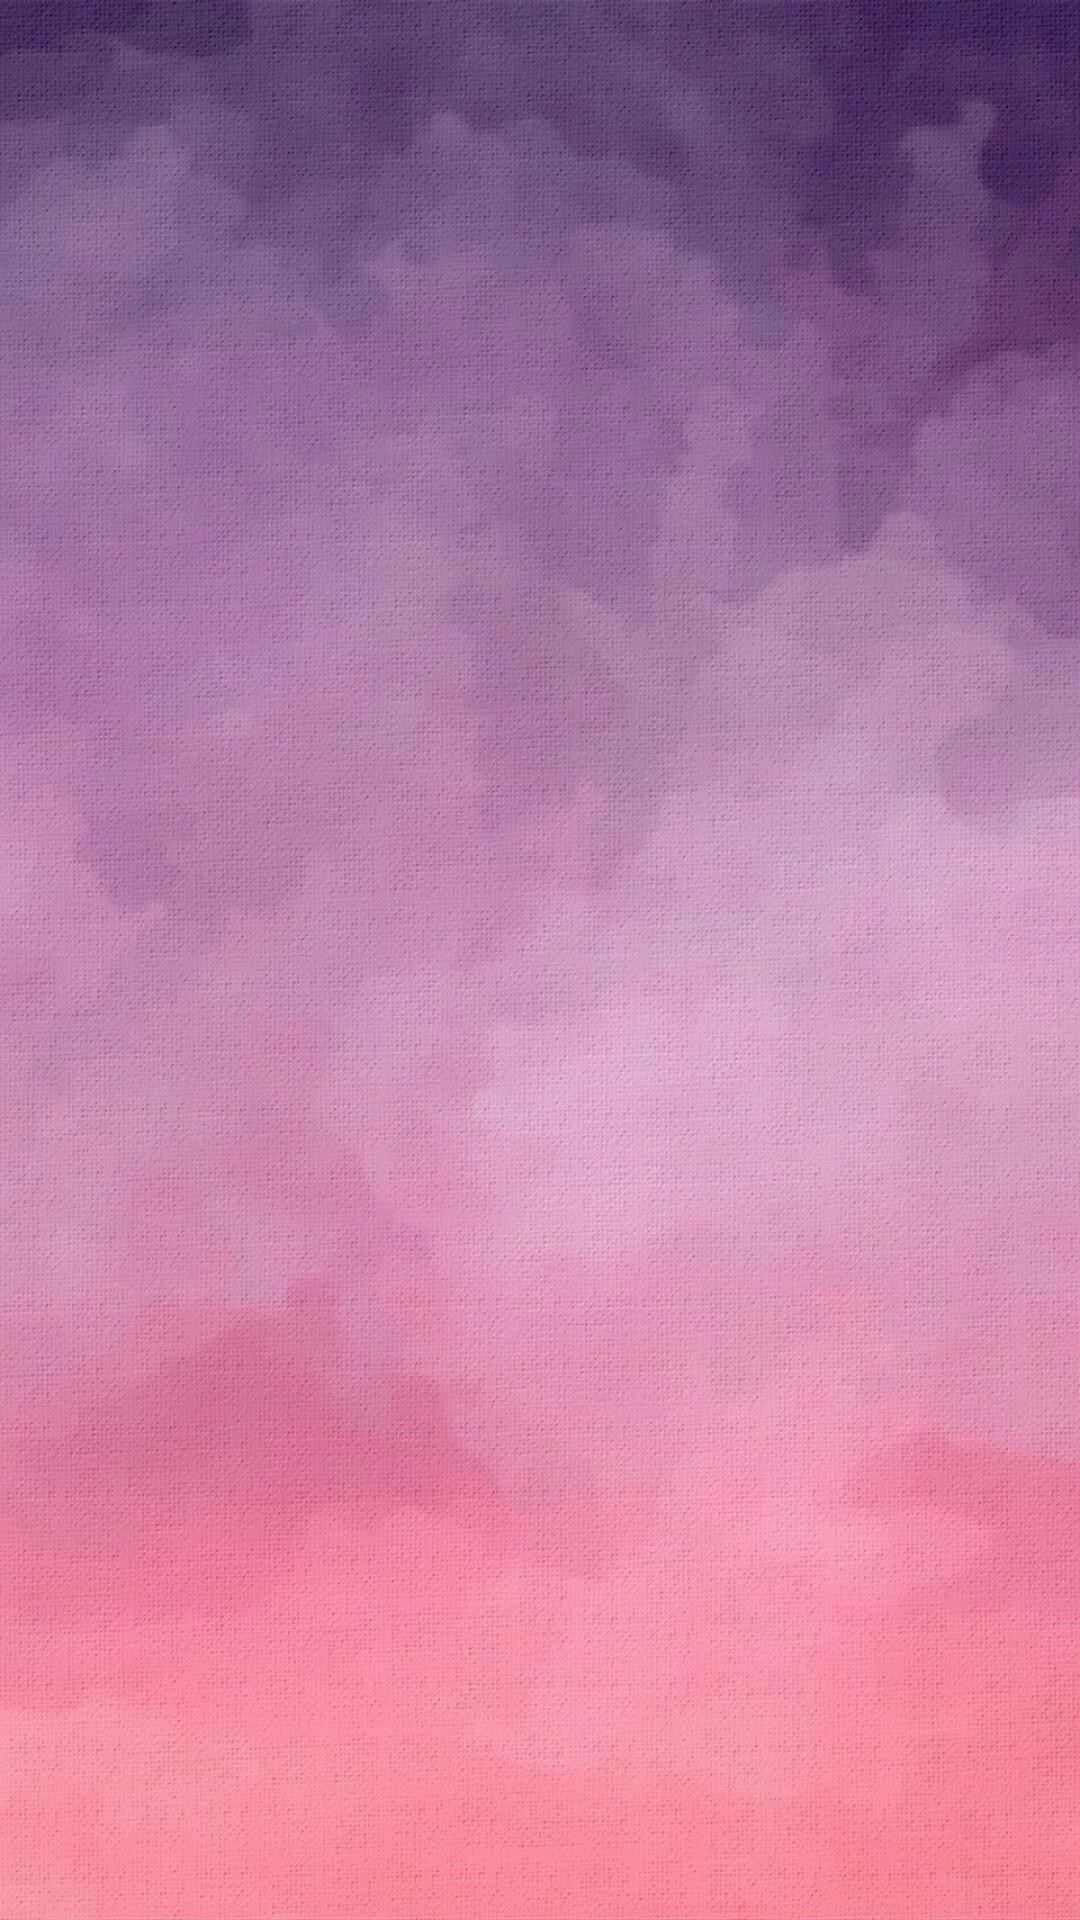 pink wallpaper for phone,pink,sky,violet,purple,red